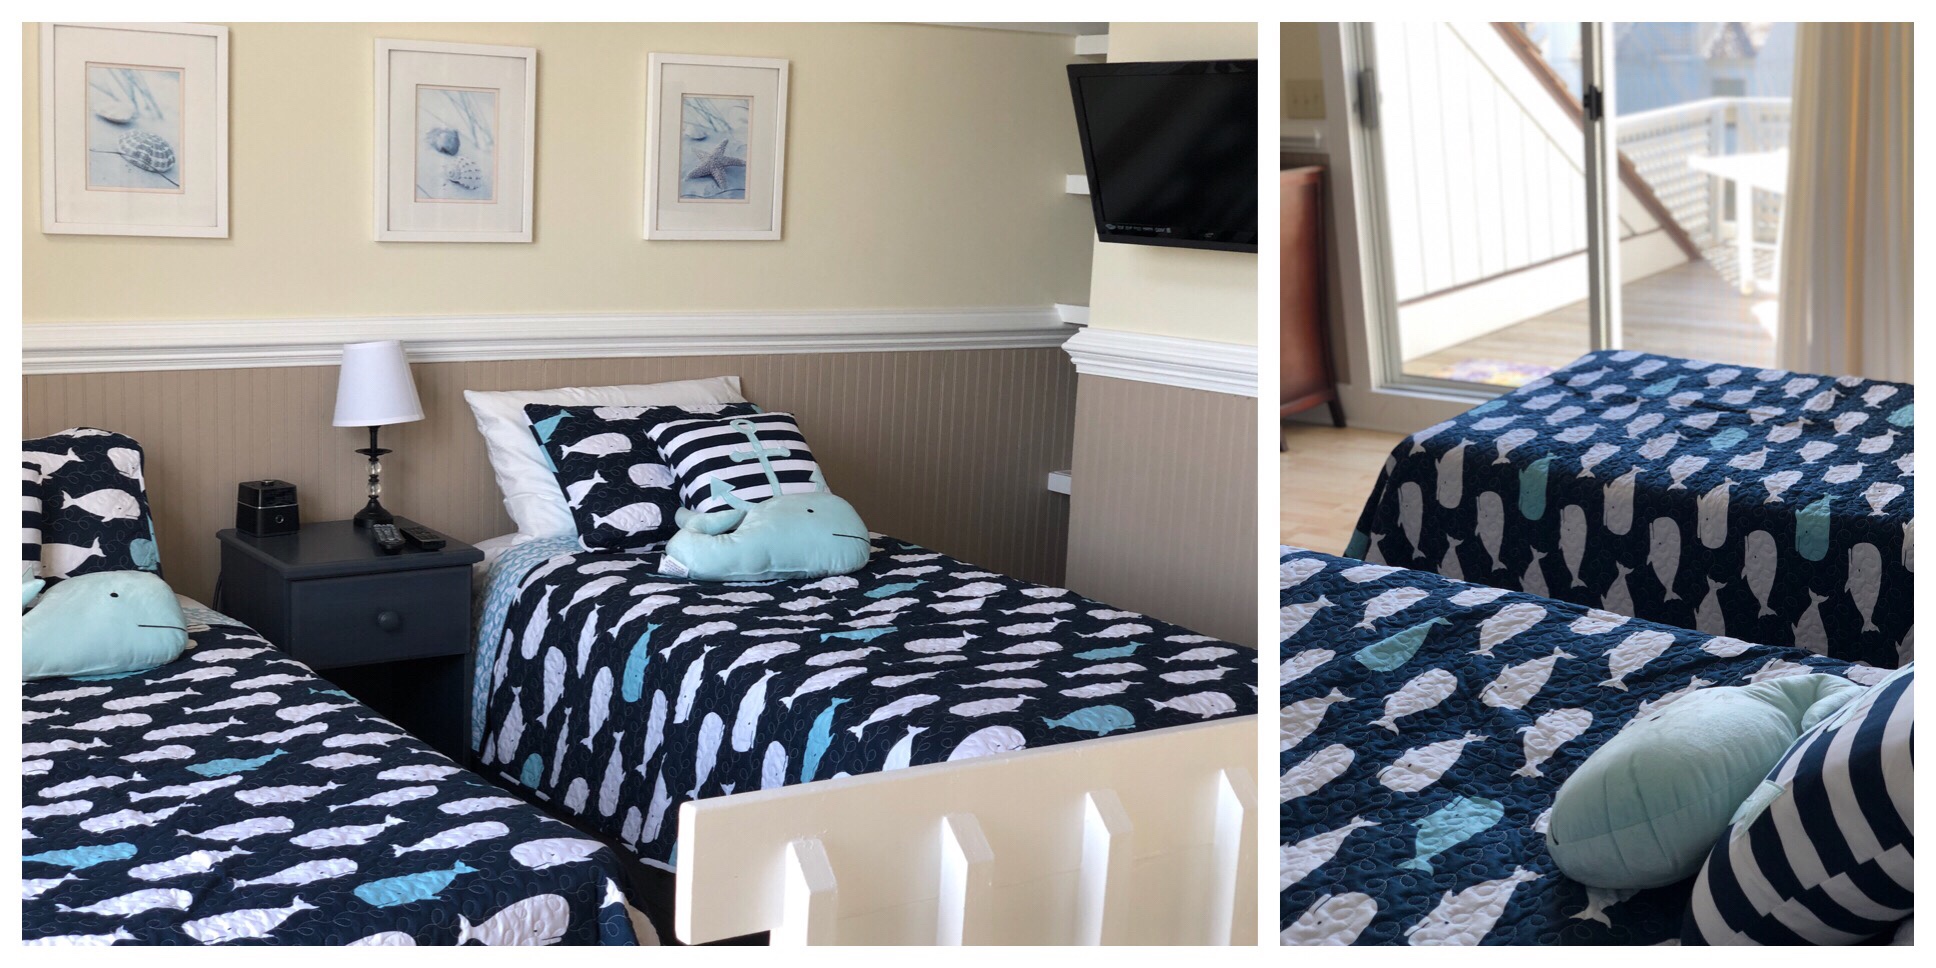 Bald Head Island Family Vacation Best Vacation Rental House - Why we love this east coast treasure and our favorite beach house on HomeAway via Misty Nelson, mom blogger, family travel blog review of NC vacation destinations 